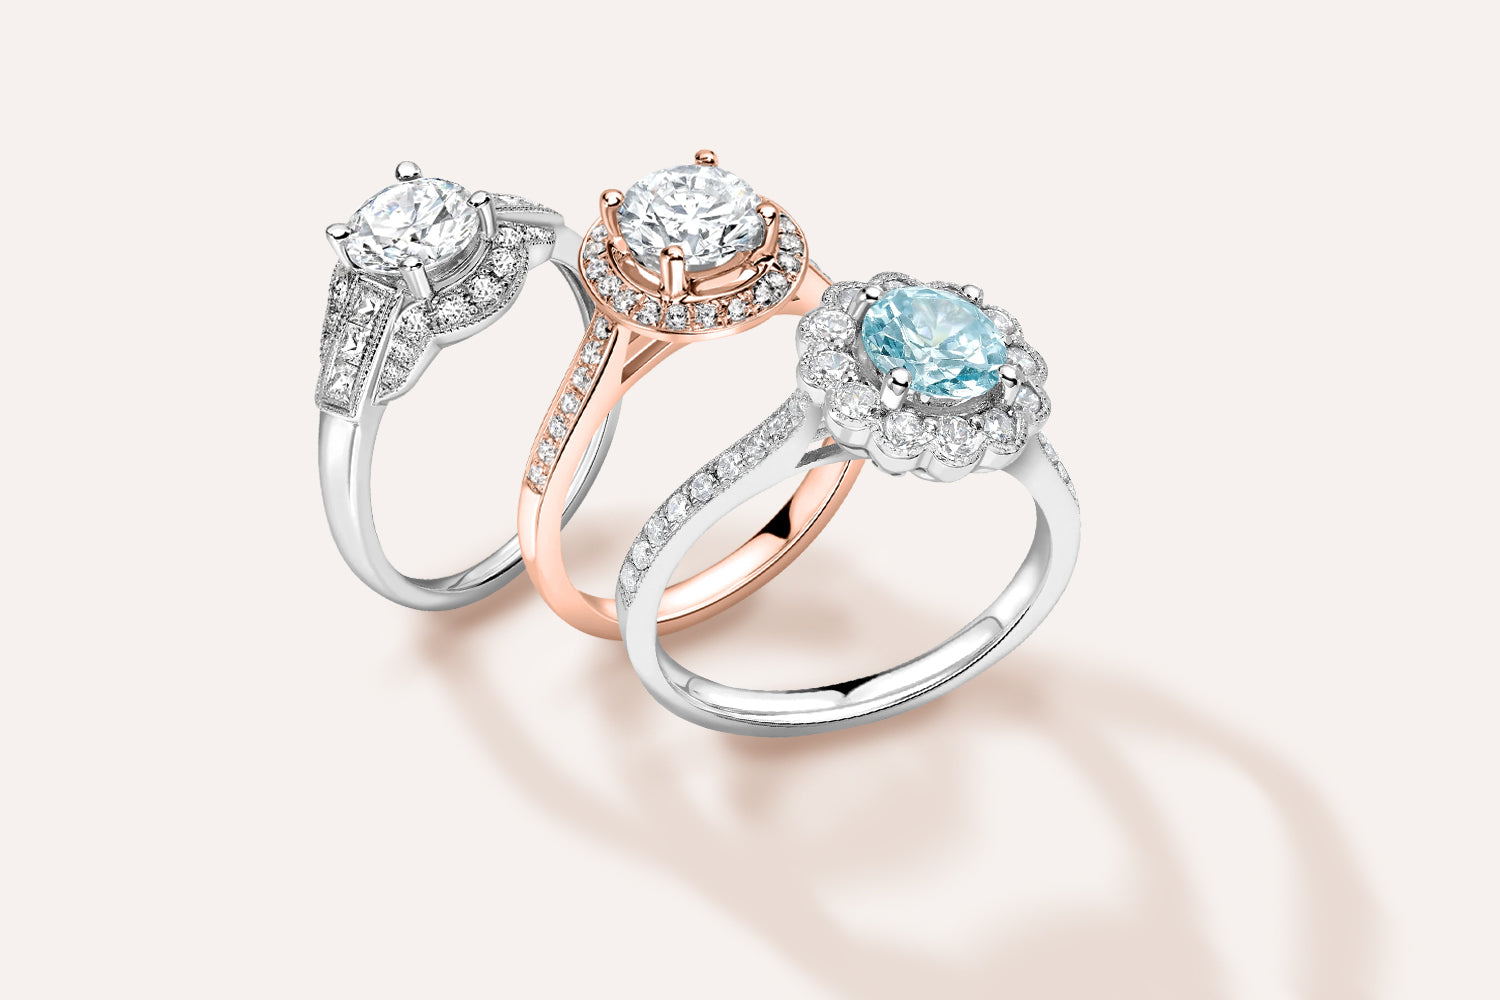 JQ Diamonds Silver and Rose Gold Engagement Rings